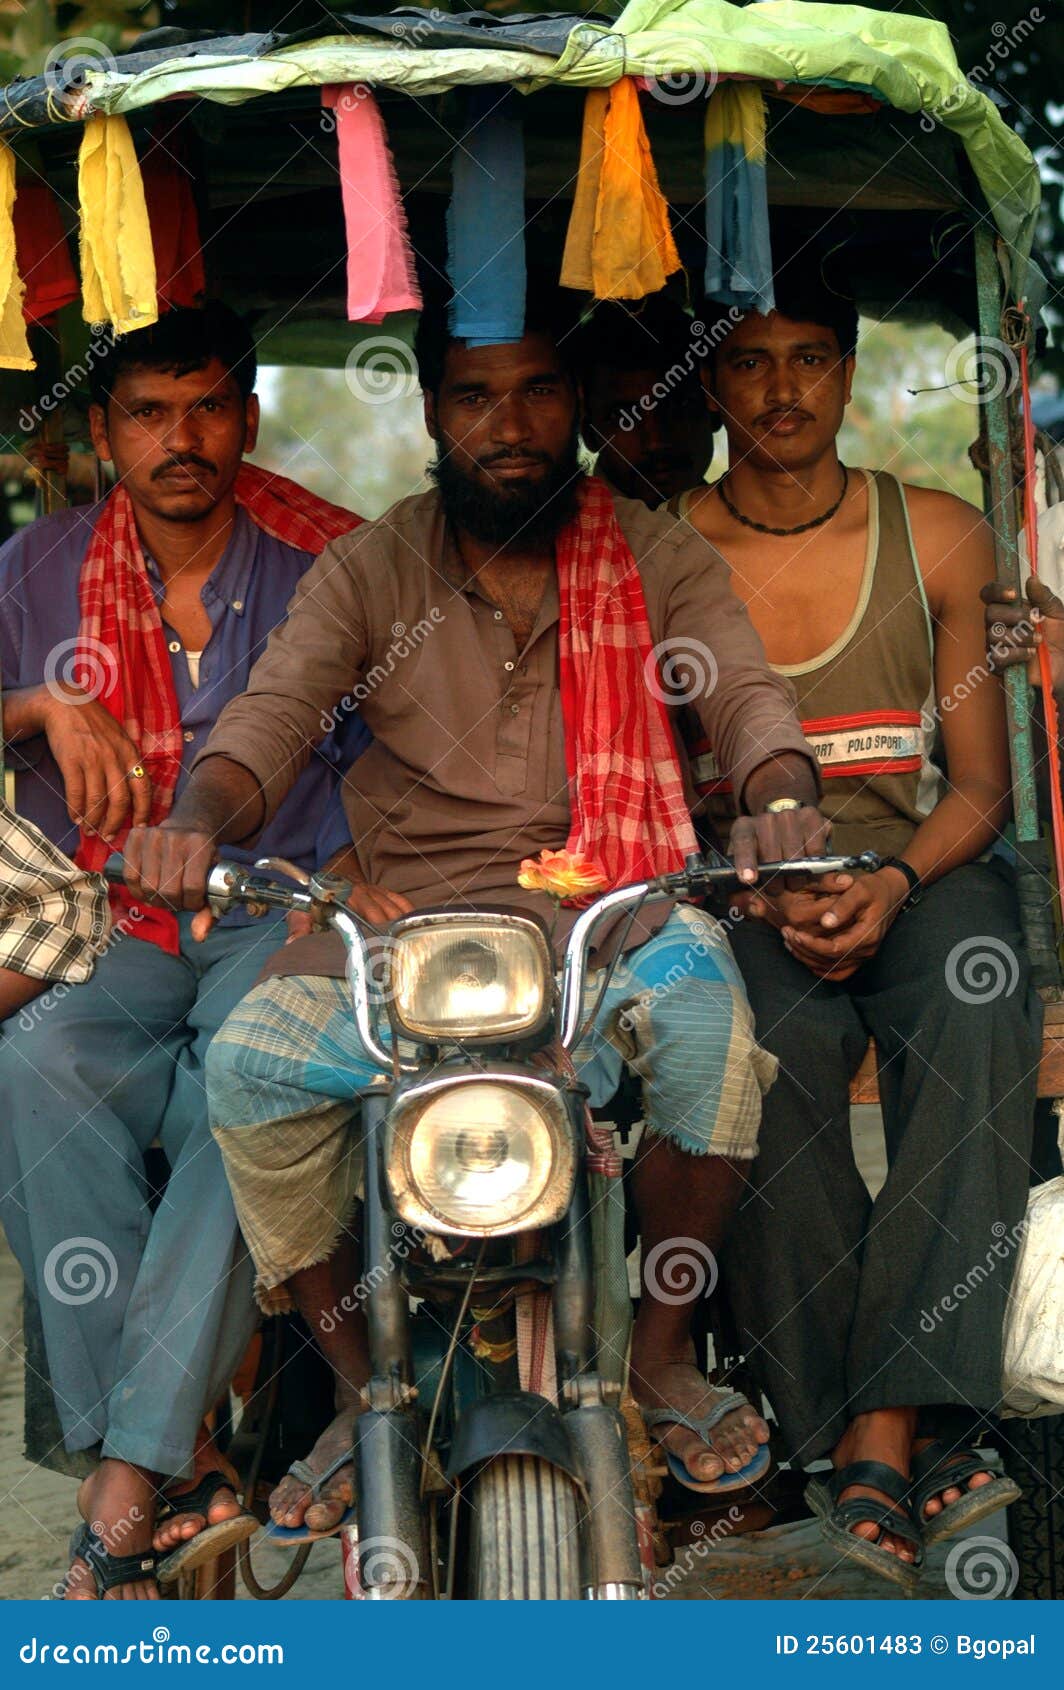 Indian Village People Editorial Stock Photo Image 25601483